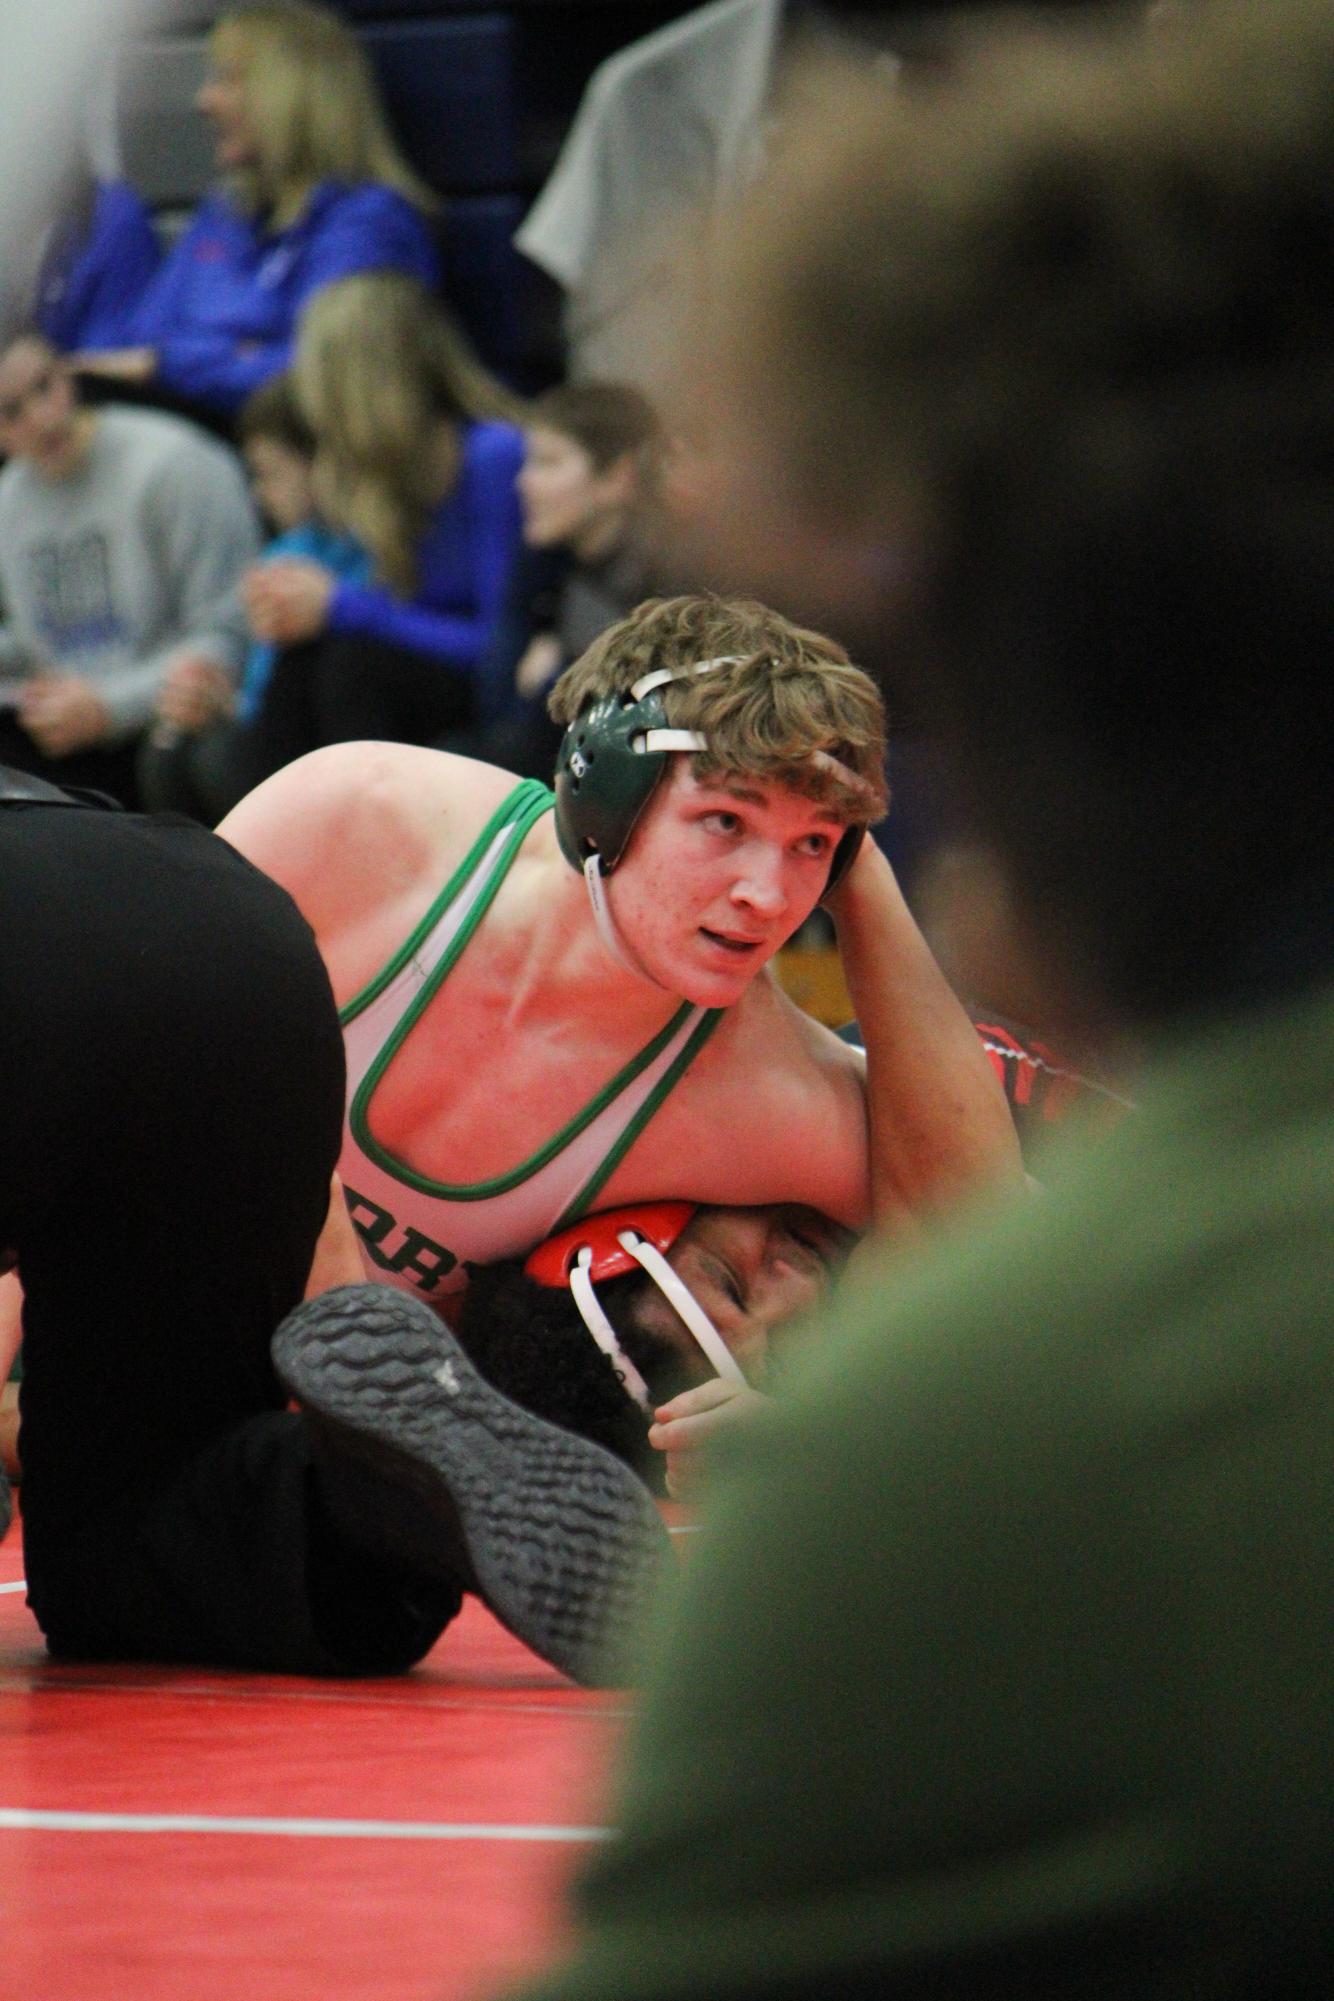 Boys+wrestling+at+Andover+%28Photos+by+Kaidence+Williams%29